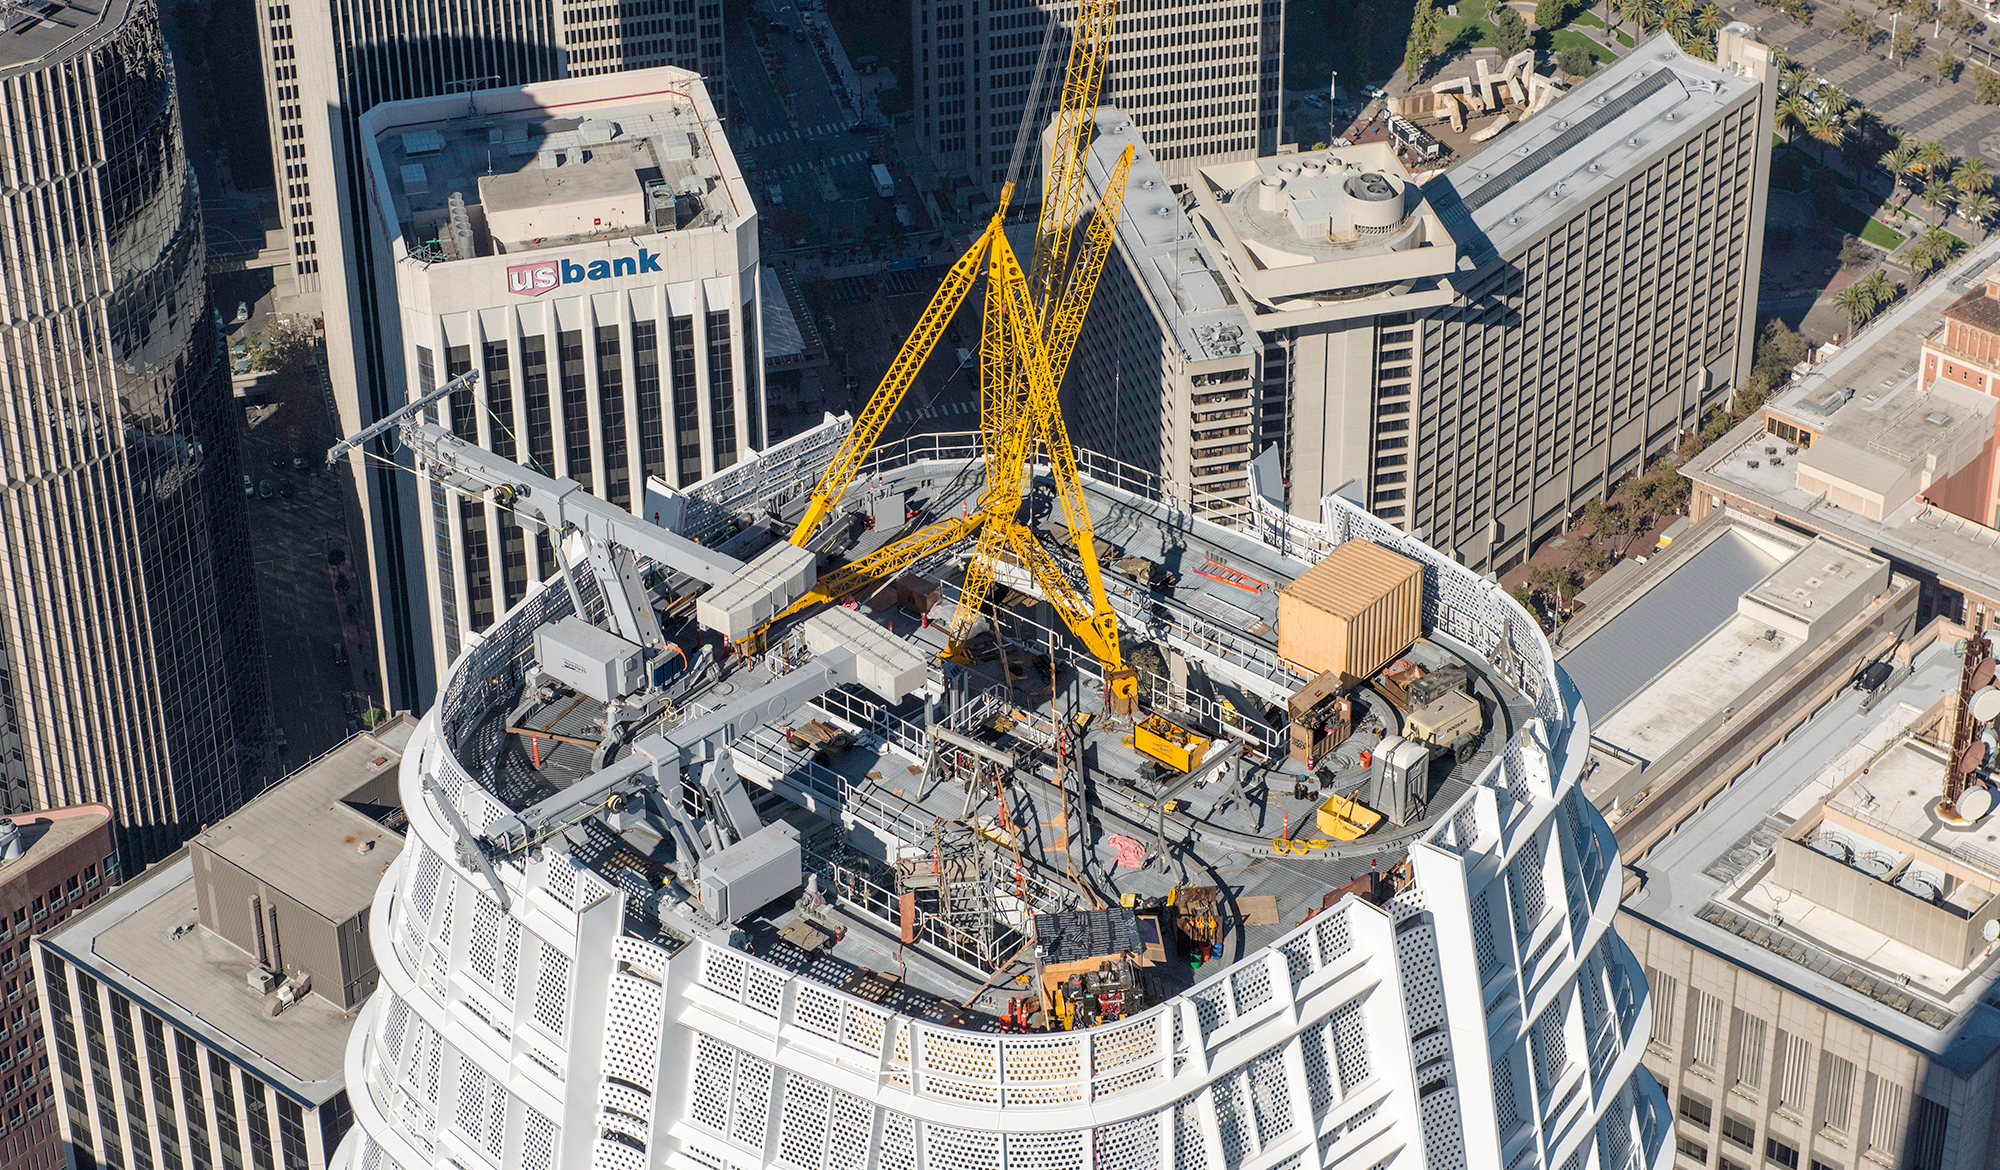 Building Industries served by MiTek - Arial shot of Salesforce tower with construction crane